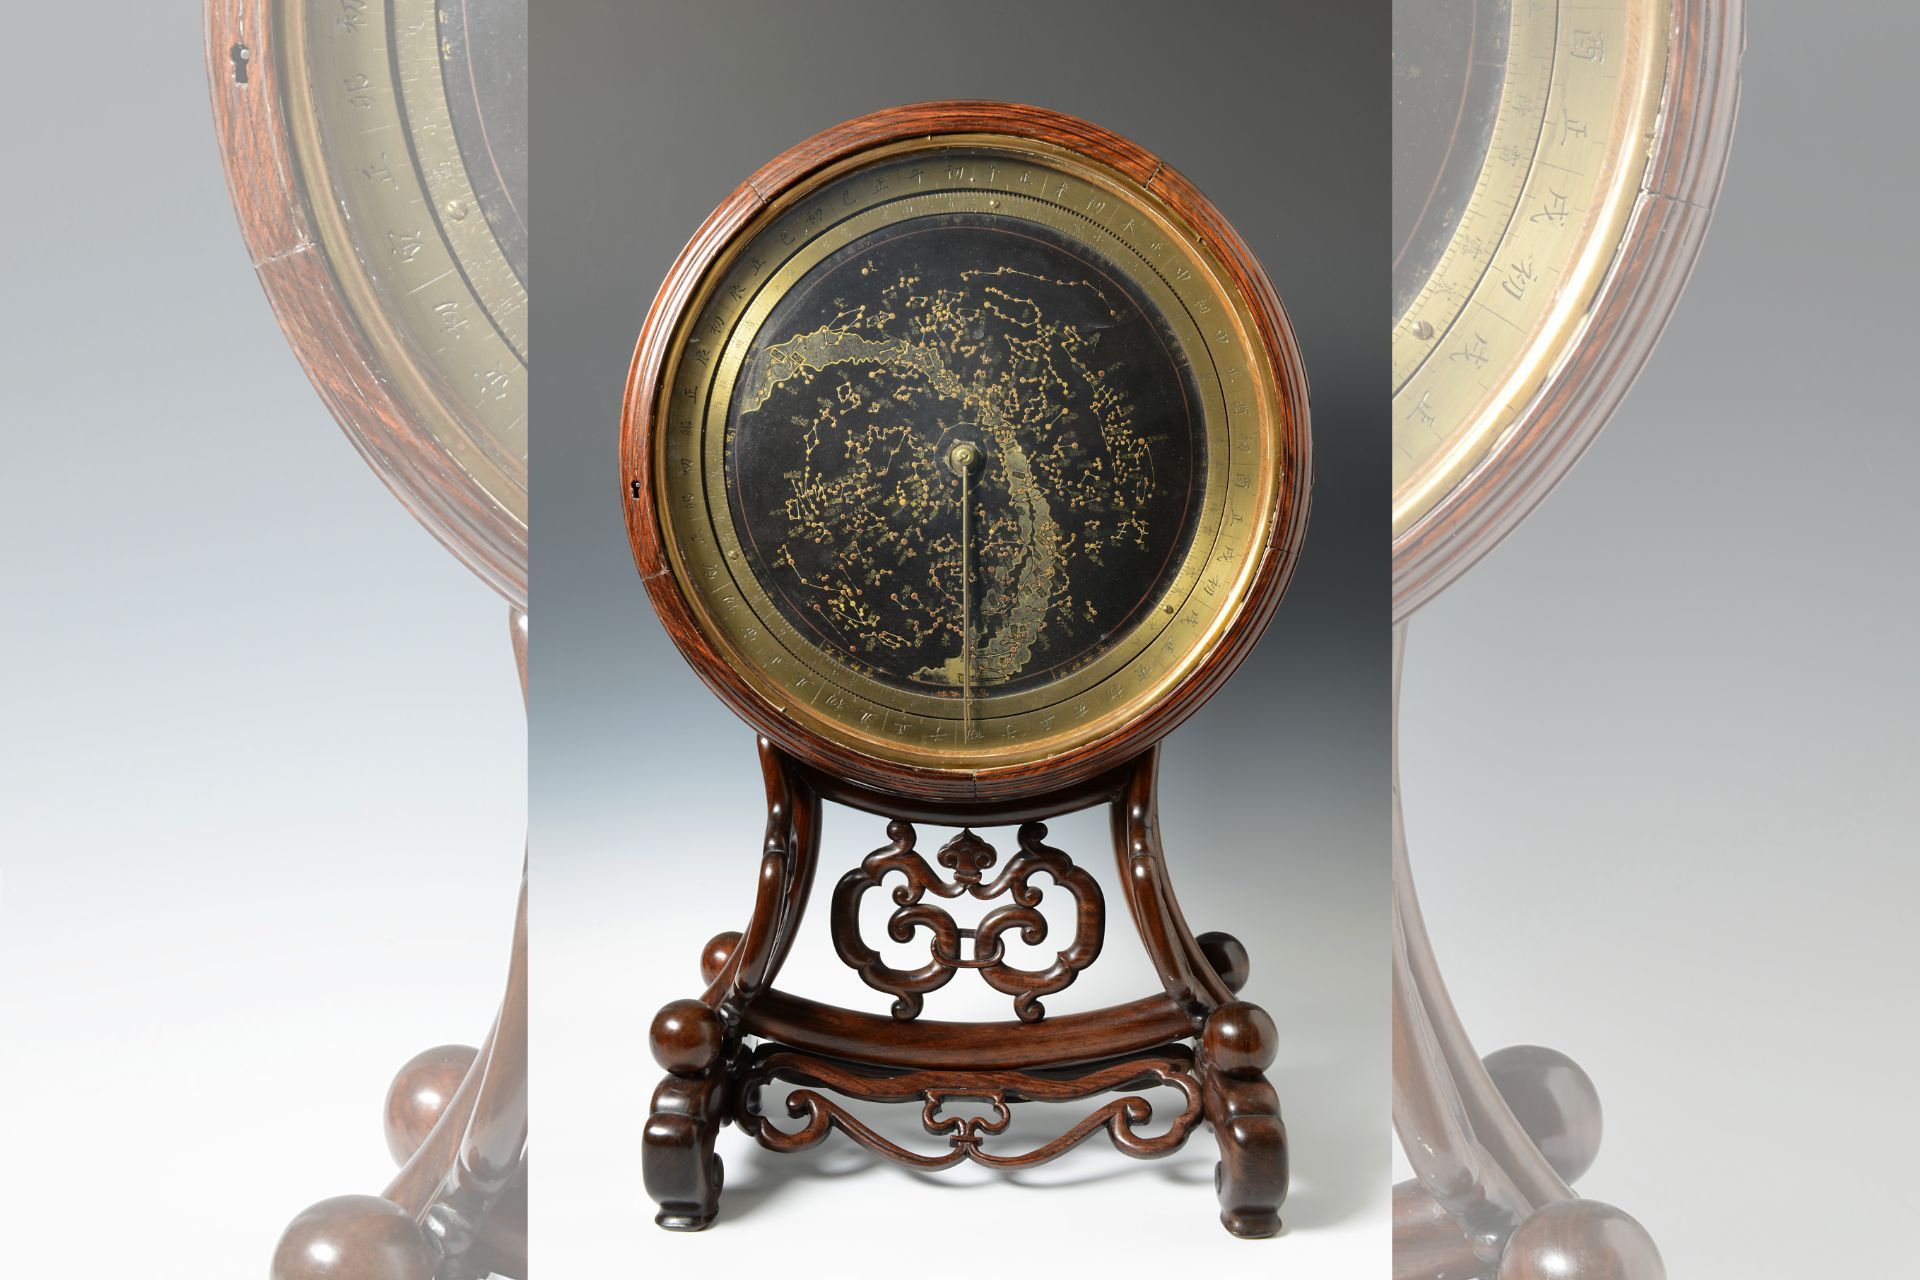 Qing dynasty astronomical clock